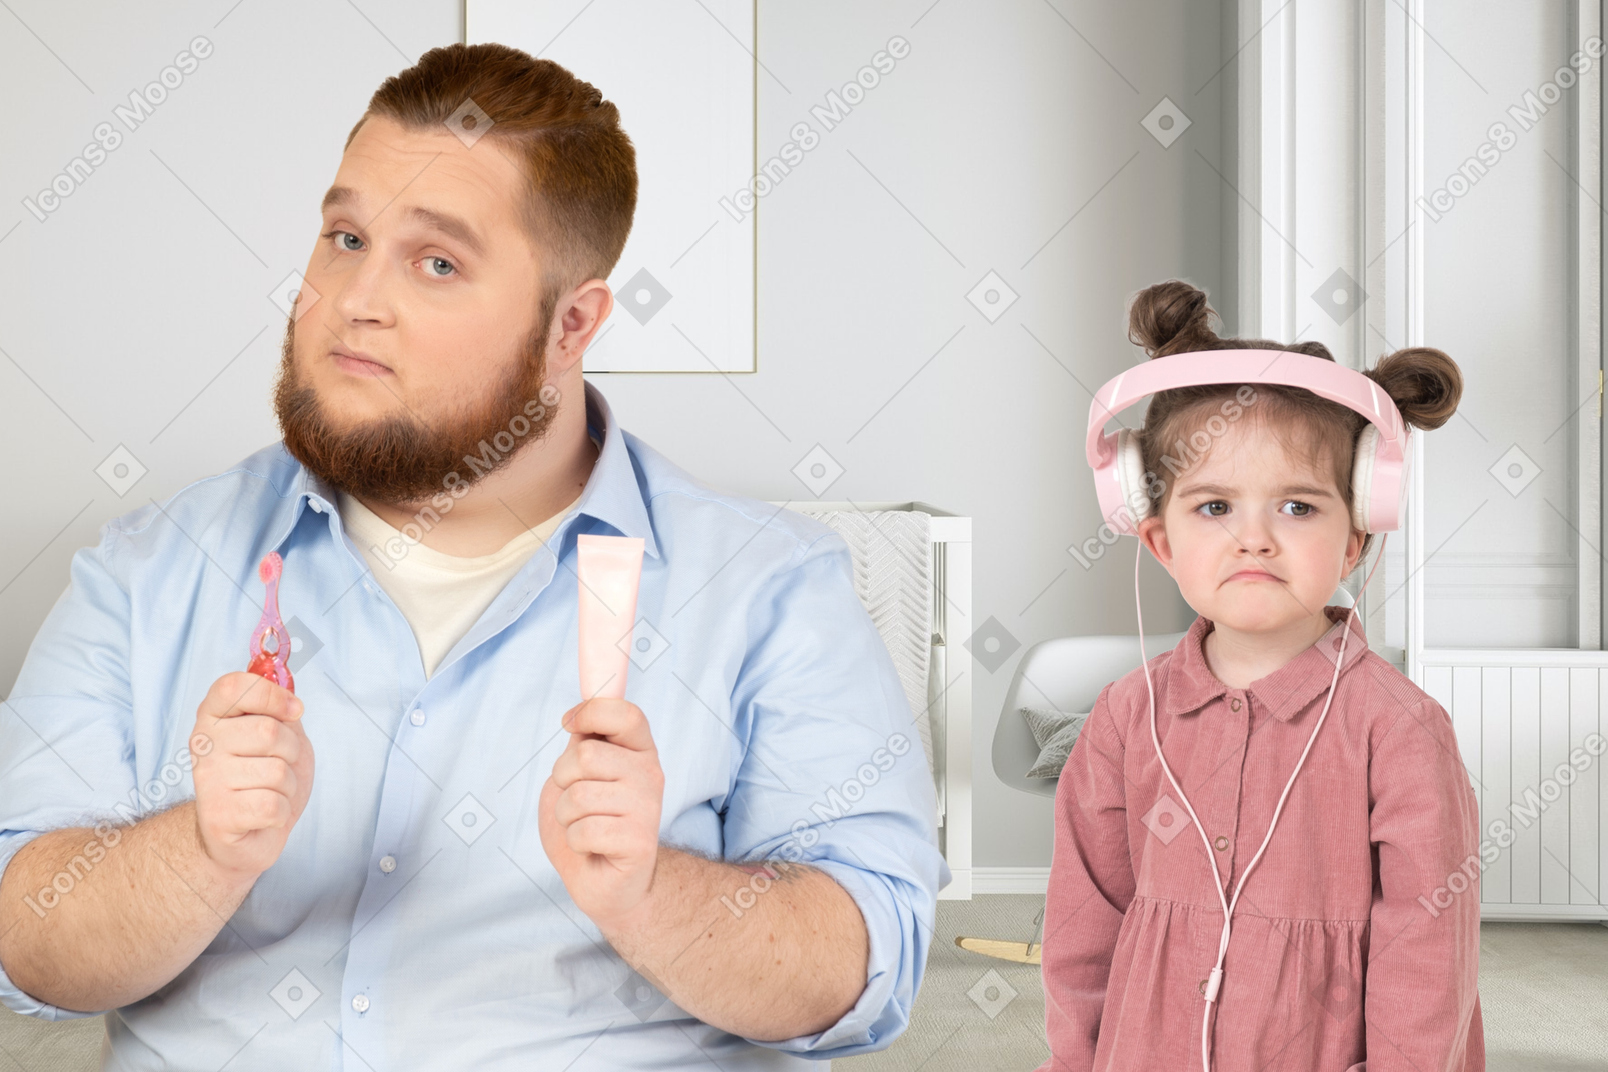 A man holding kid's toothpaste and toothbrush and standing next to an upset little girl in headphones